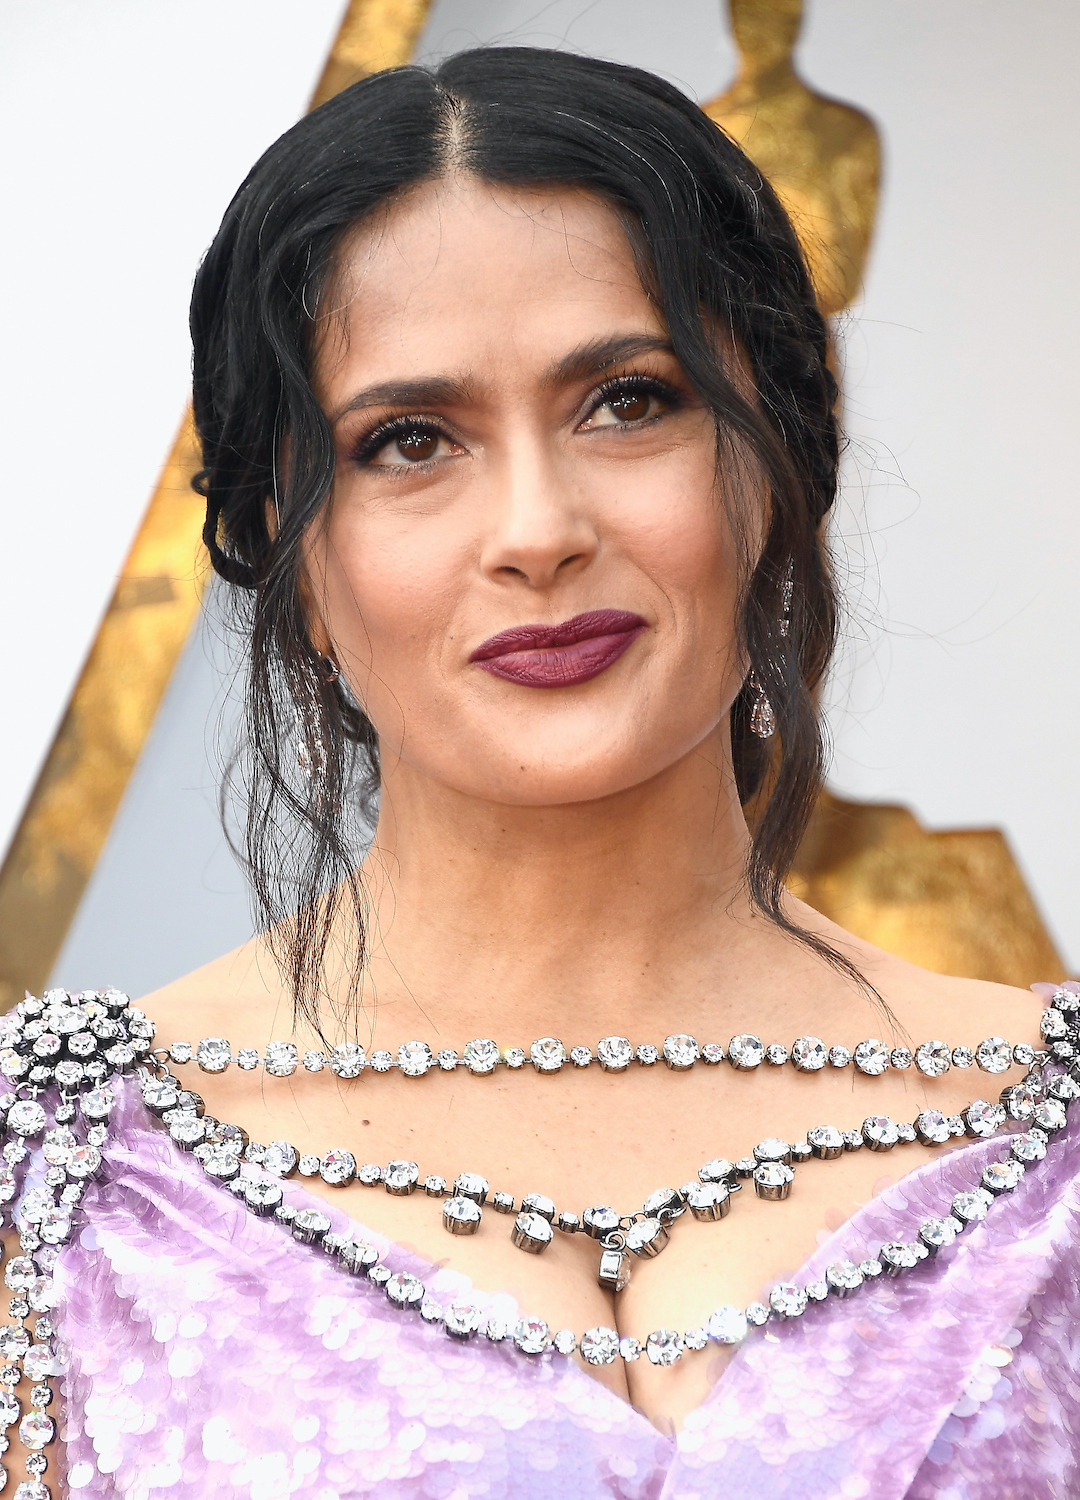 Salma Hayek attends the 90th Annual Academy Awards at Hollywood & Highland Center on March 4, 2018 in Hollywood, California